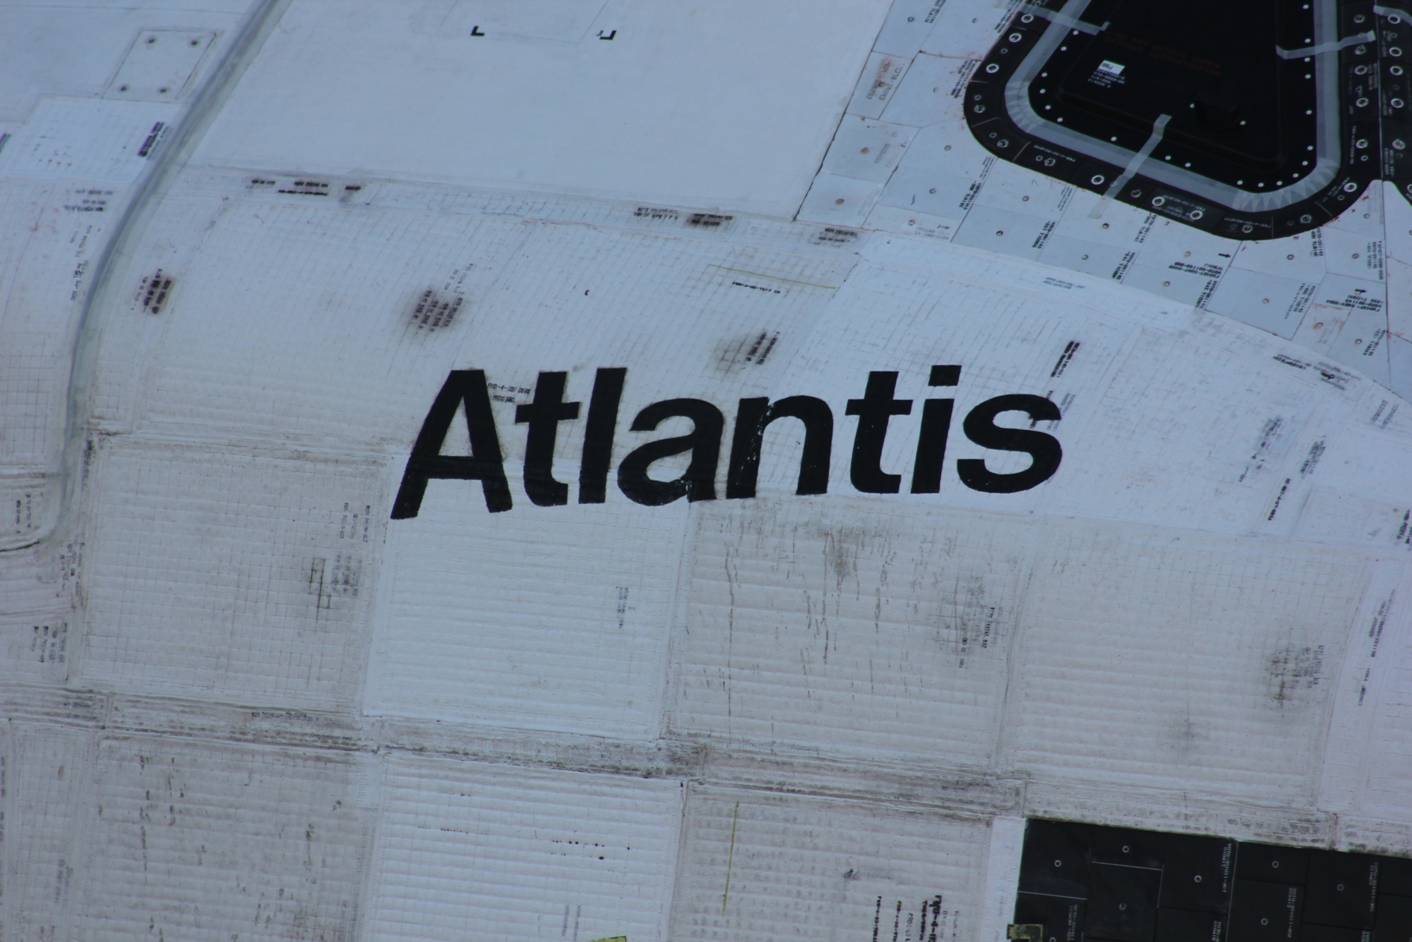 Atlantis - veteran of 33 space missions between October 1985 and July 2011 - is about to embark on her 34th and perhaps most important mission of all: to inspire a new generation of explorers. Photo Credit: Alan Walters / awaltersphoto.com